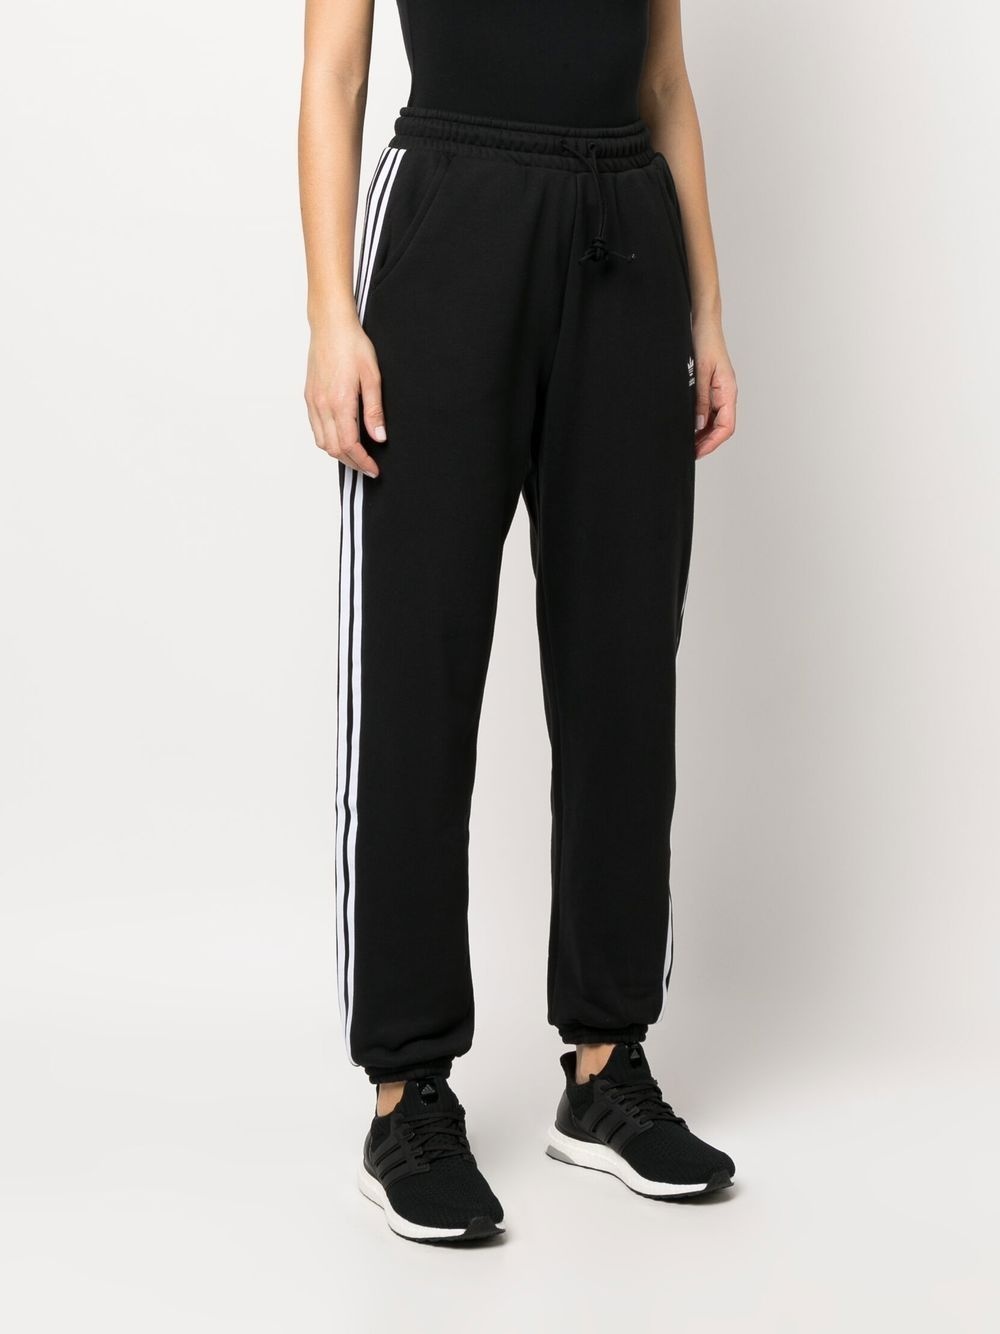 embroidered-logo detail track pants - 3